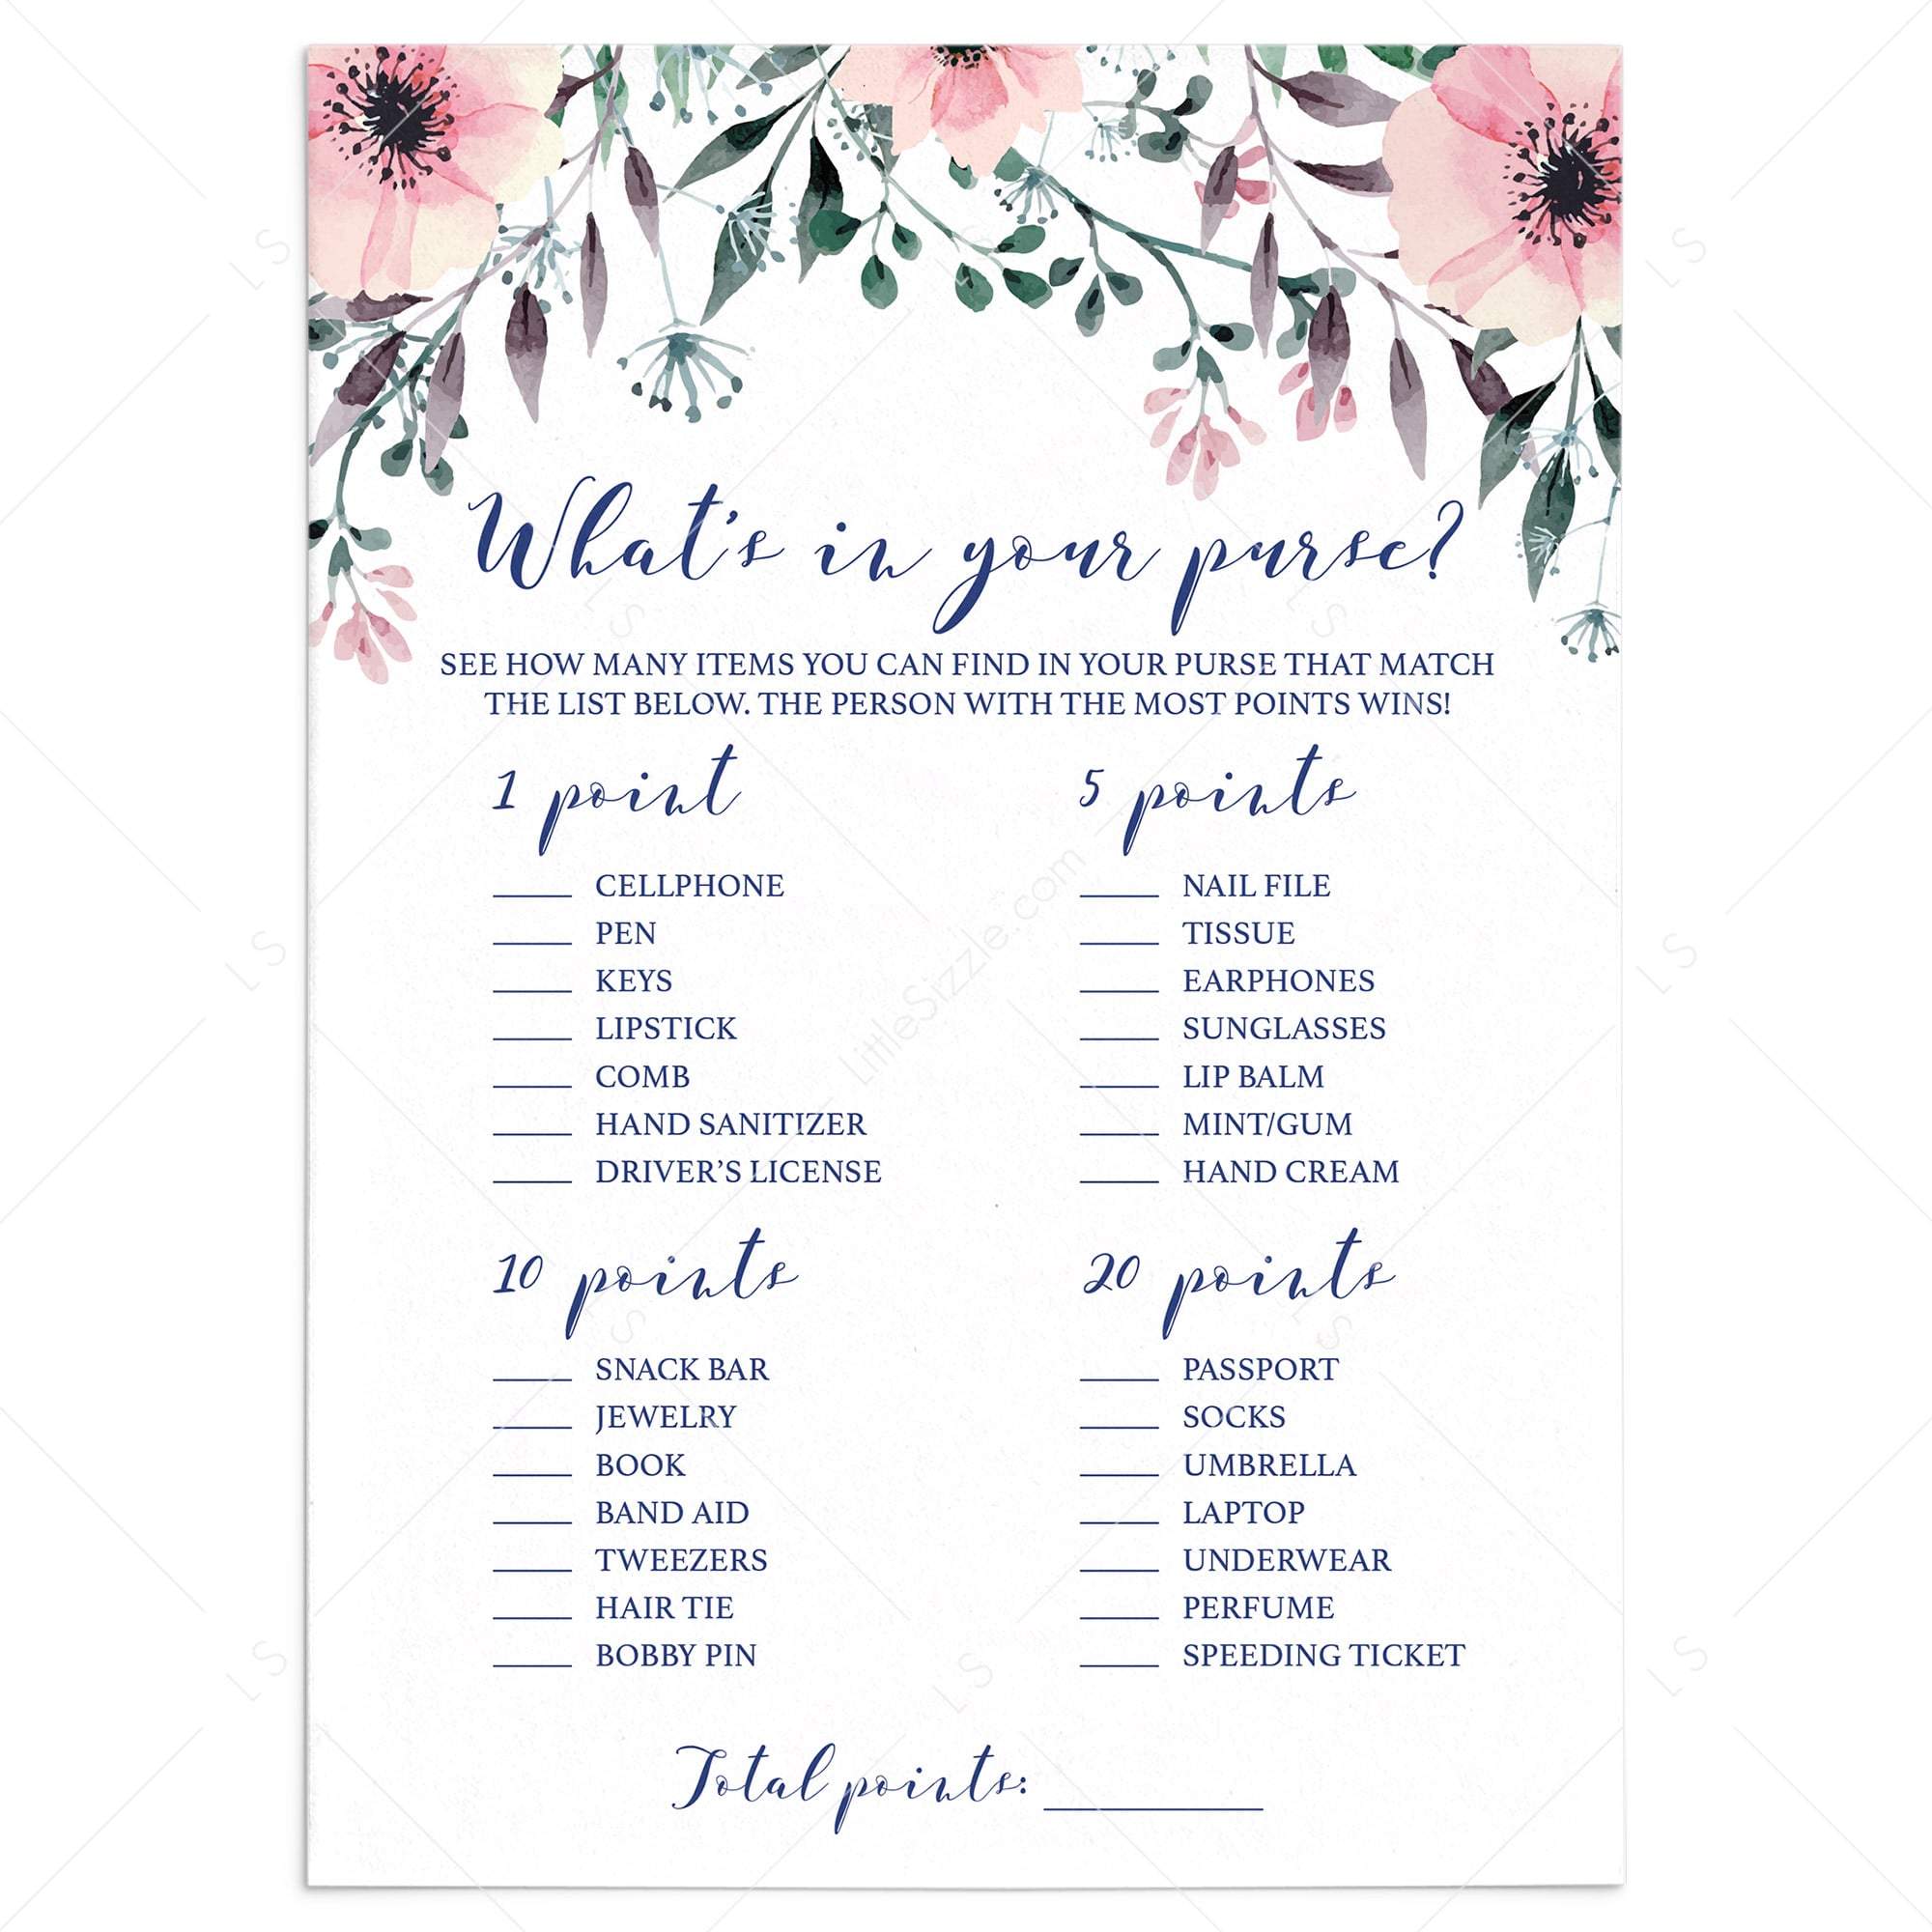 Pink Bridal Shower Purse Raid Game Printable Download by LittleSizzle